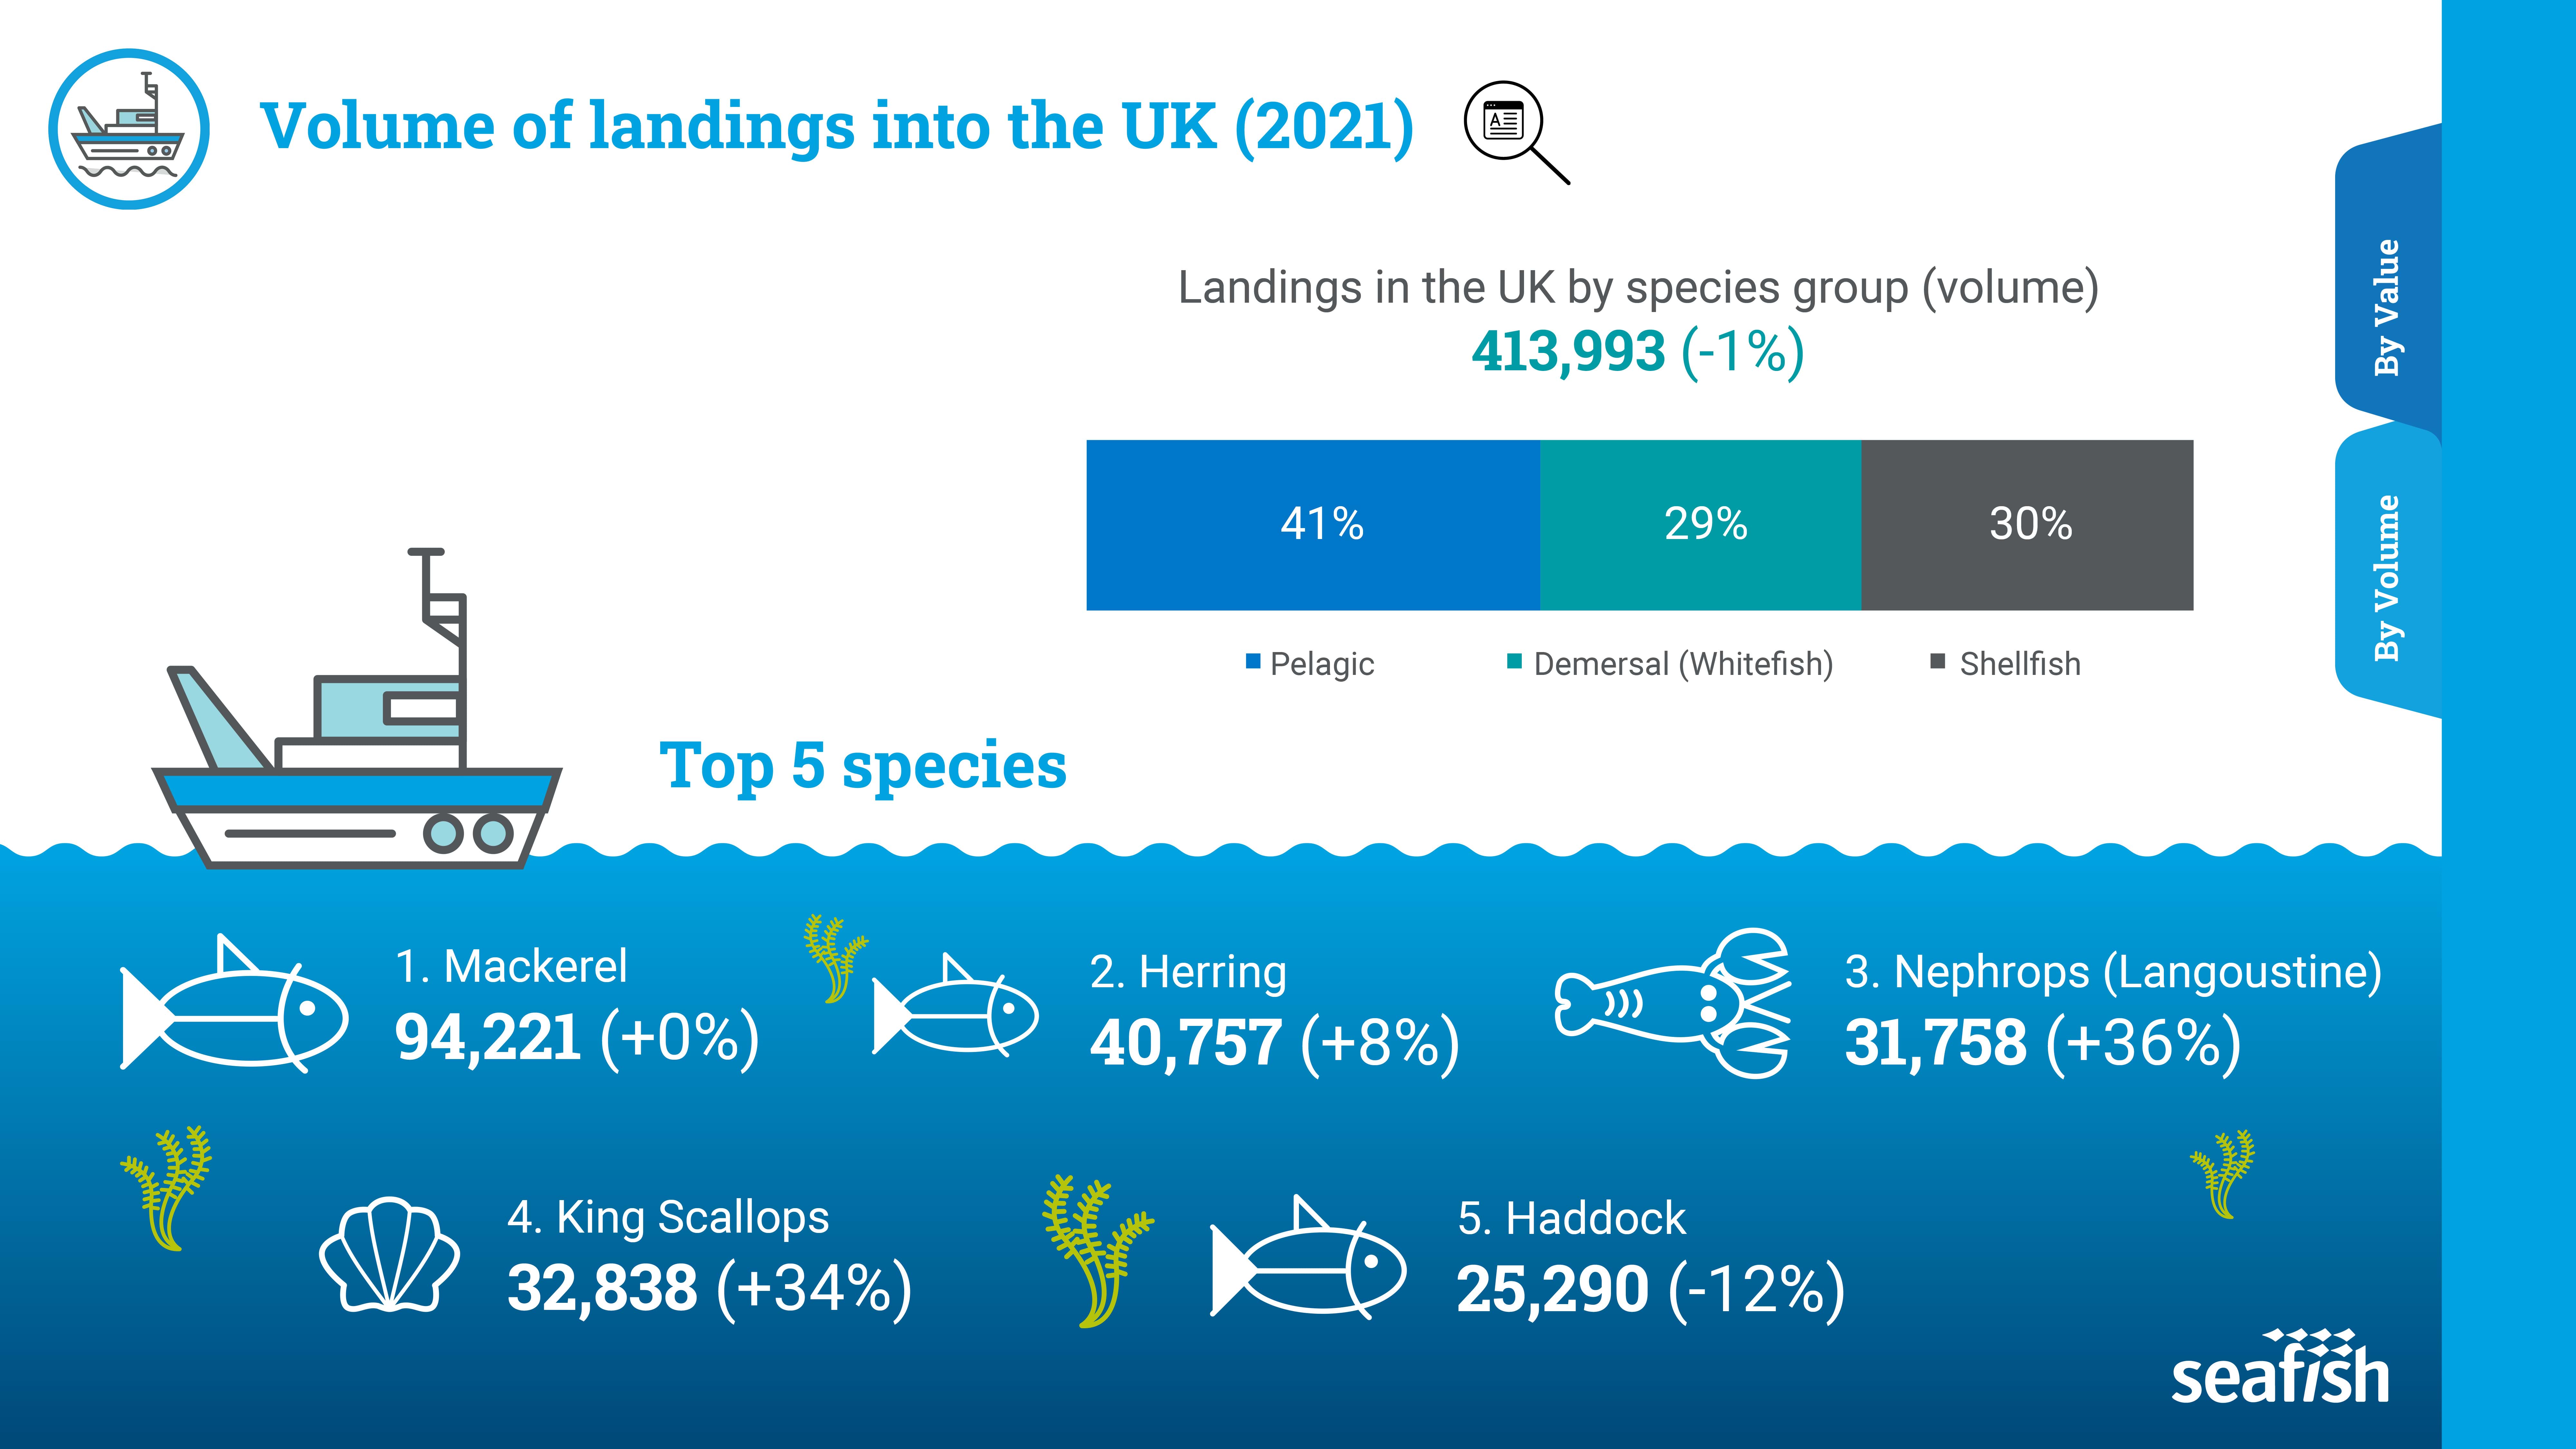 Infographic showing the volume of landings into the UK (2021) of the top five species, Mackerel, Herring, King scallops, Nephrops and Haddock